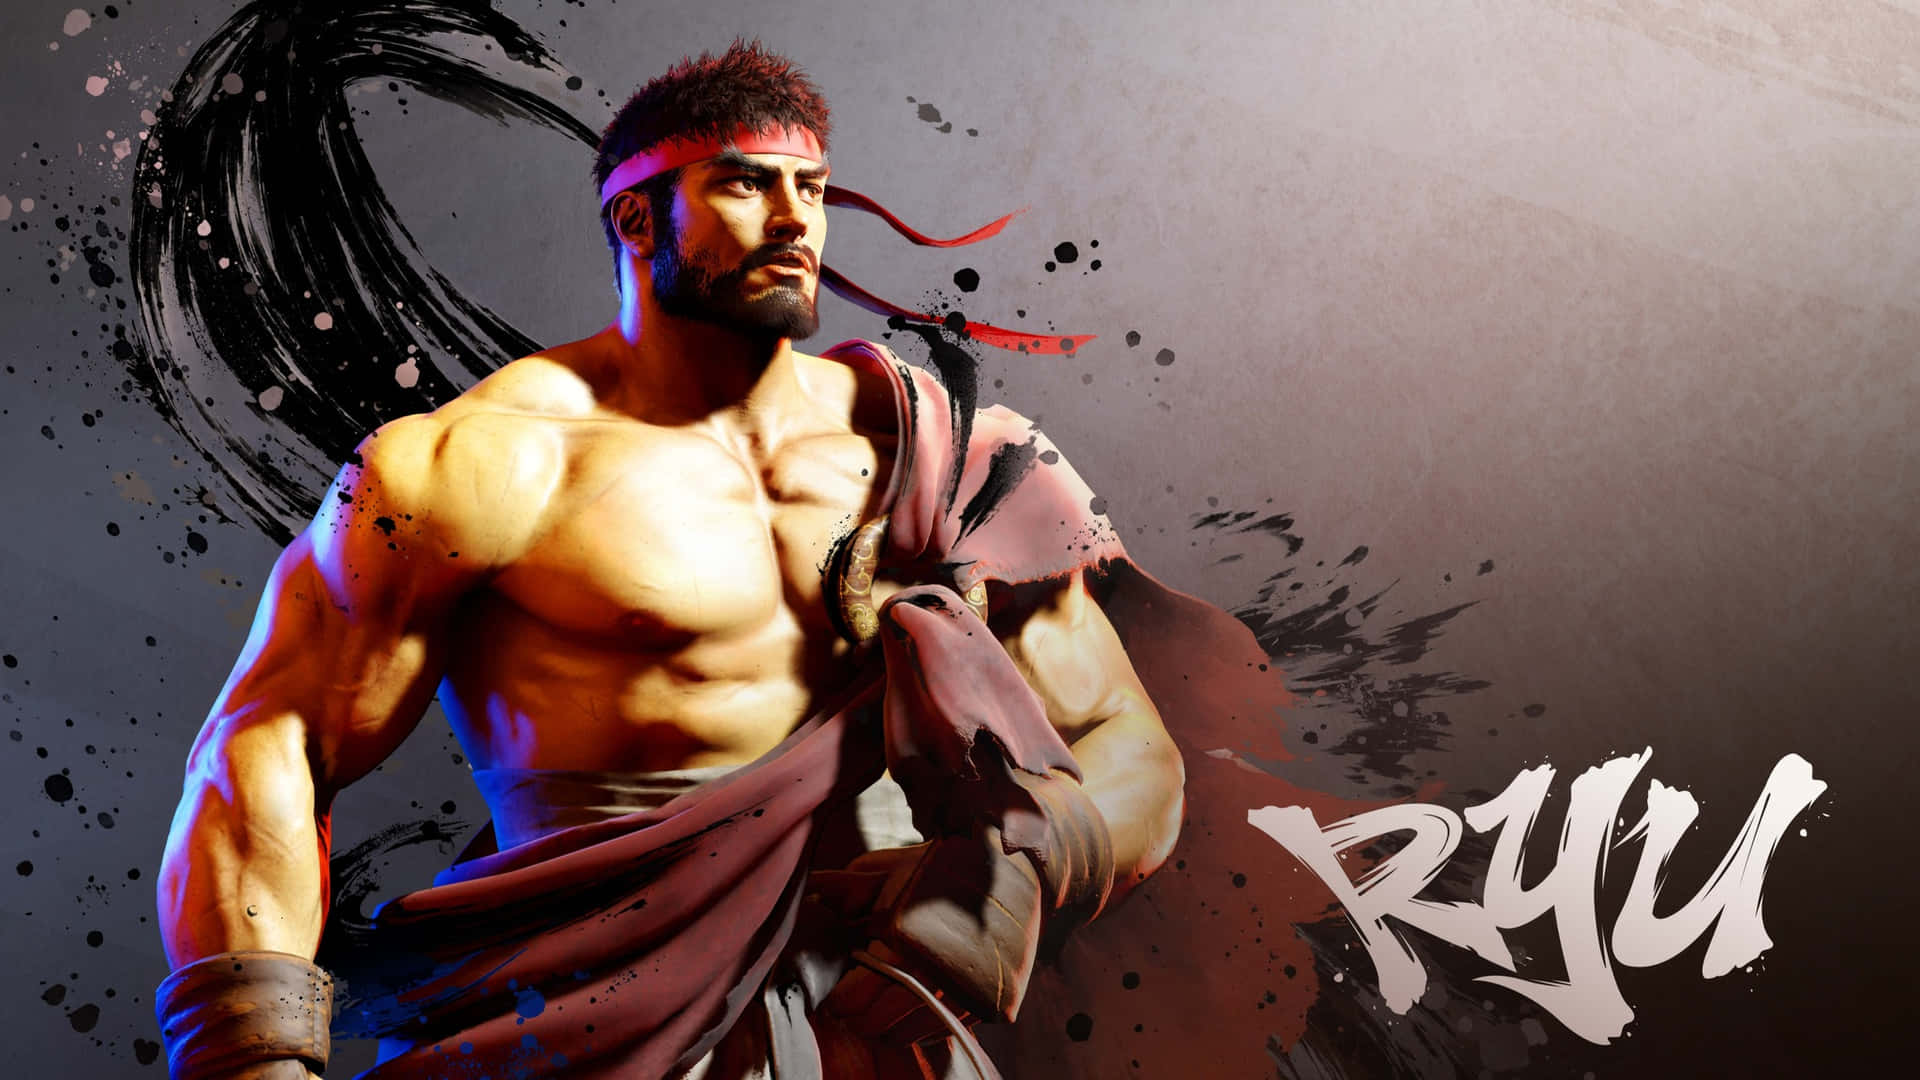 Ryu Fights his Way to Victory